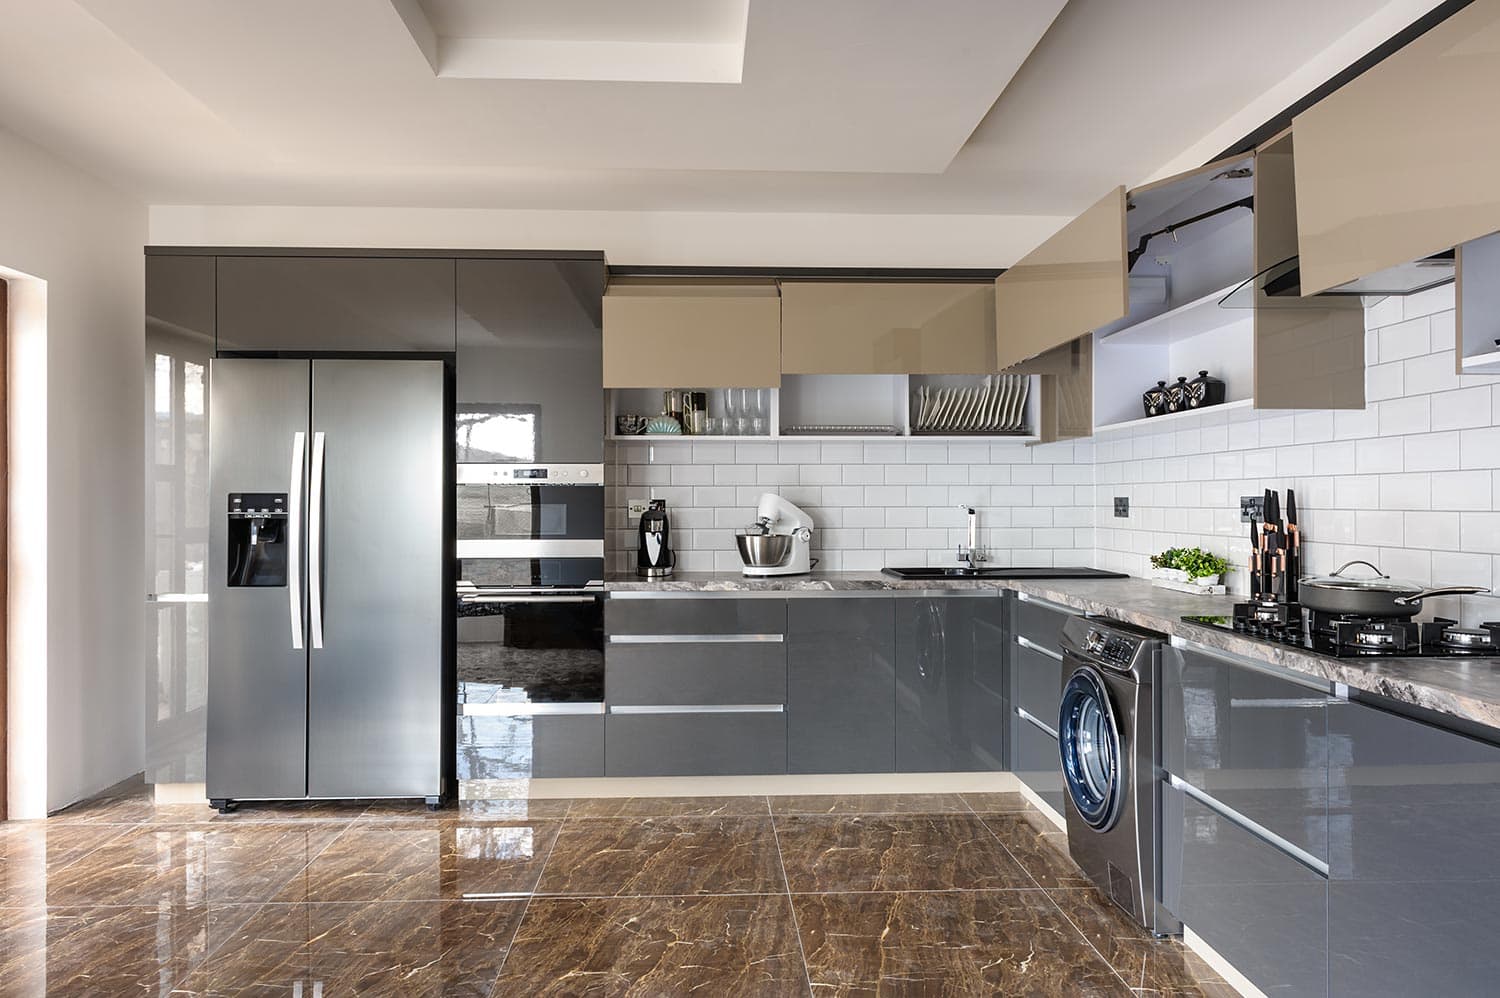 Spacious luxury well designed modern grey, beige and white kitchen with marble tiles floor